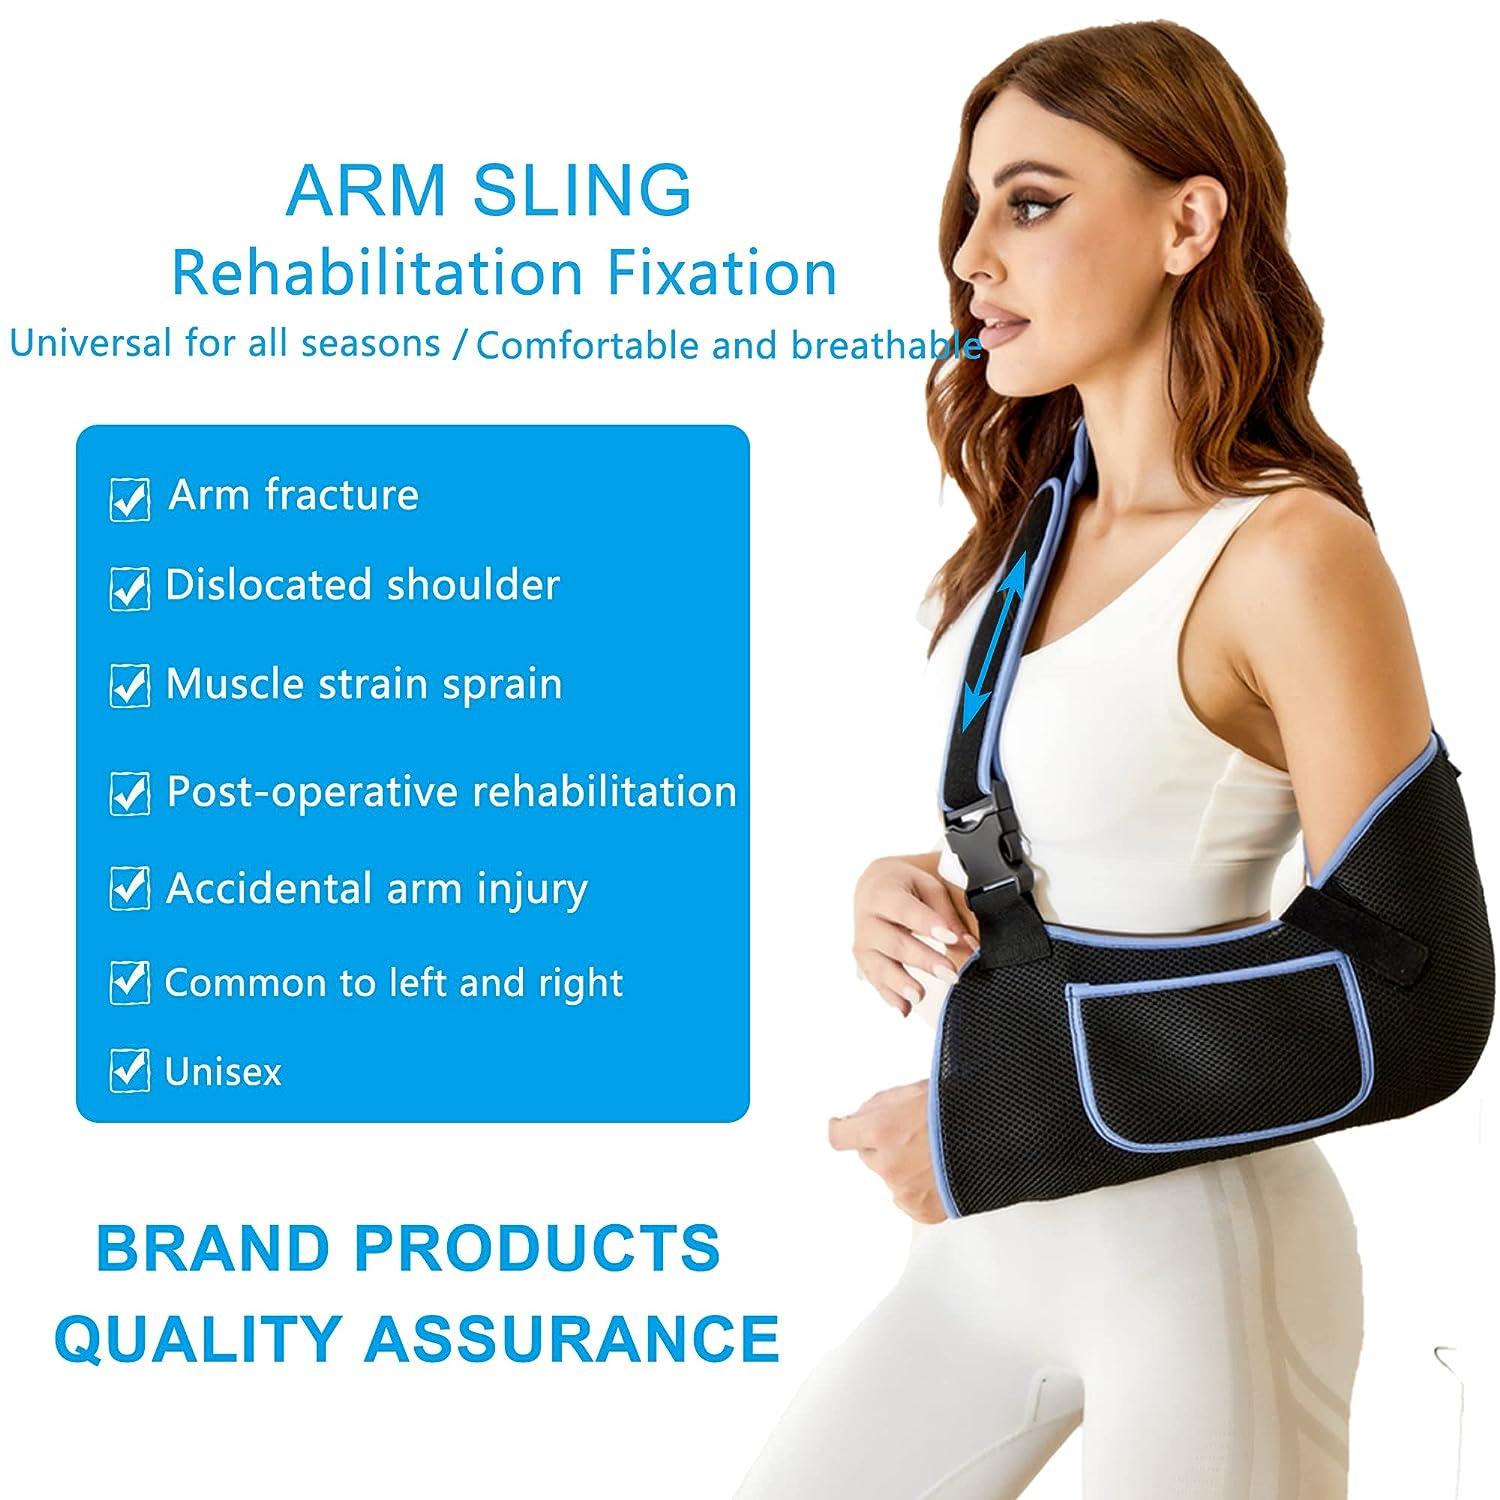 Amazon.com: DouHeal Arm Sling Shoulder Immobilizer, Medical Rotator Cuff  Support Brace with Pocket, Sling for Shoulder Injury, Arm Injury, Left &  Right Arm, Men & Women, for Dislocated, Fracture, Strained (M) :